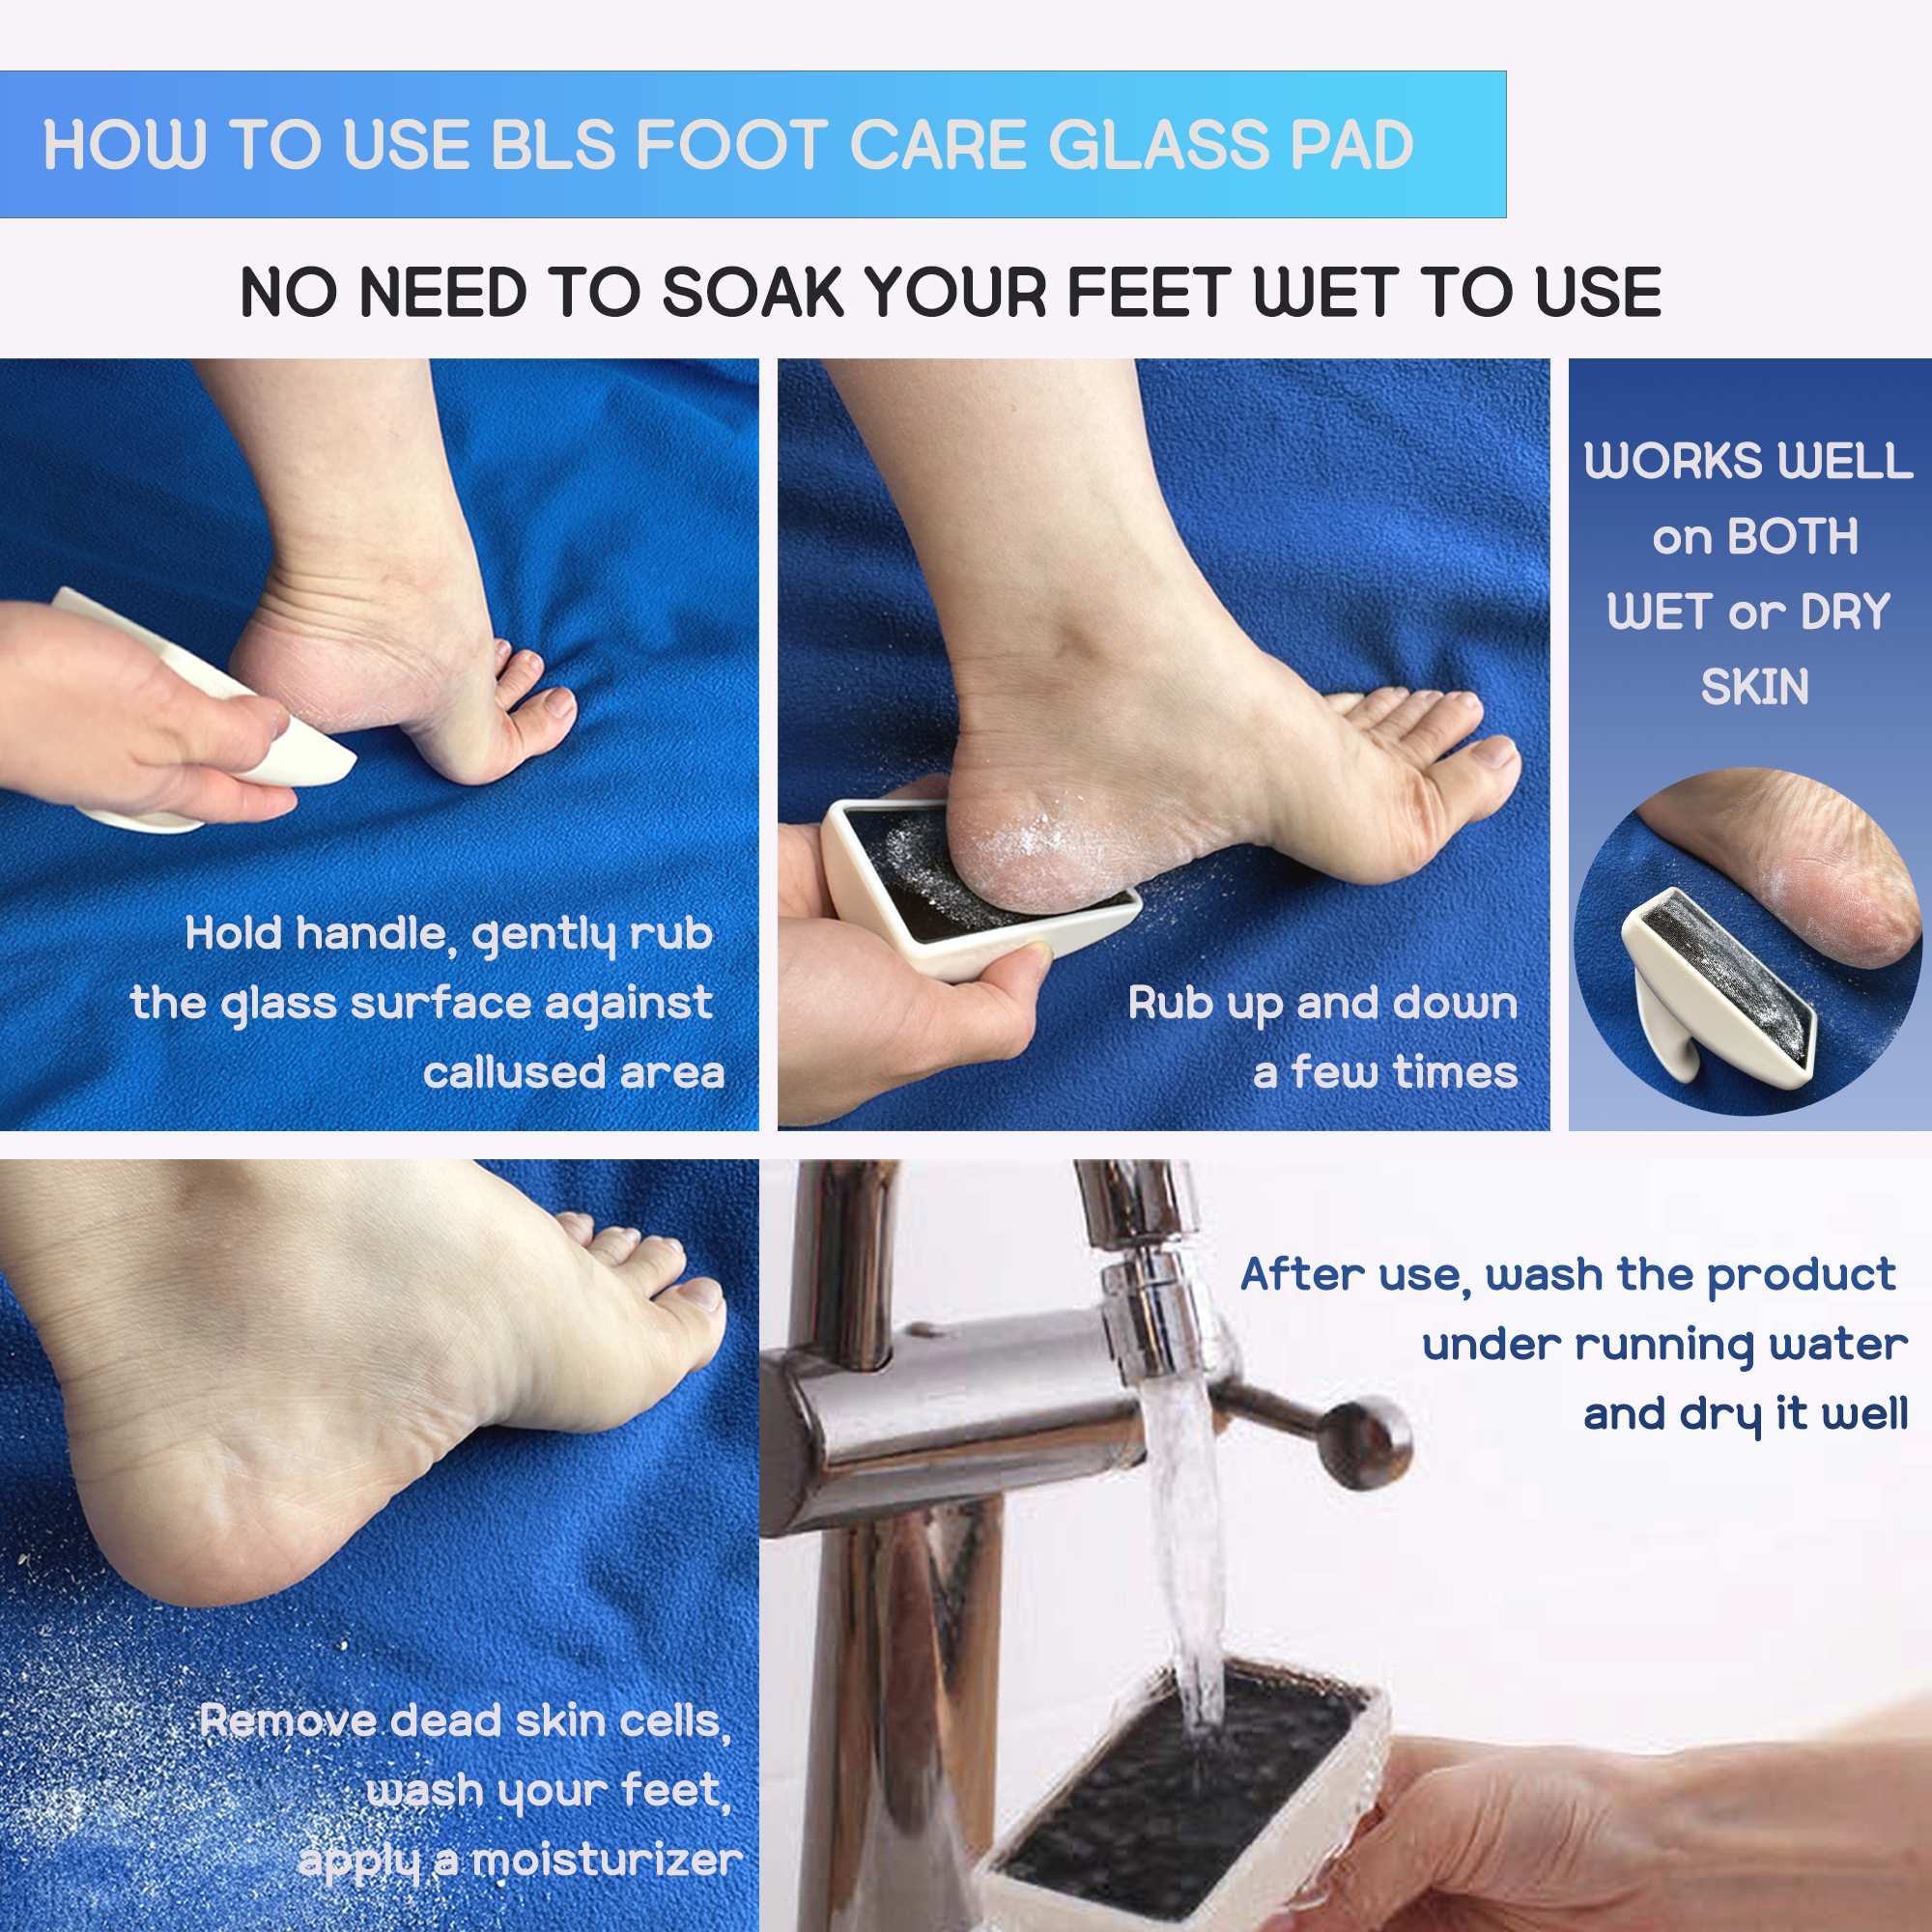 BLS Foot Care Glass Pad